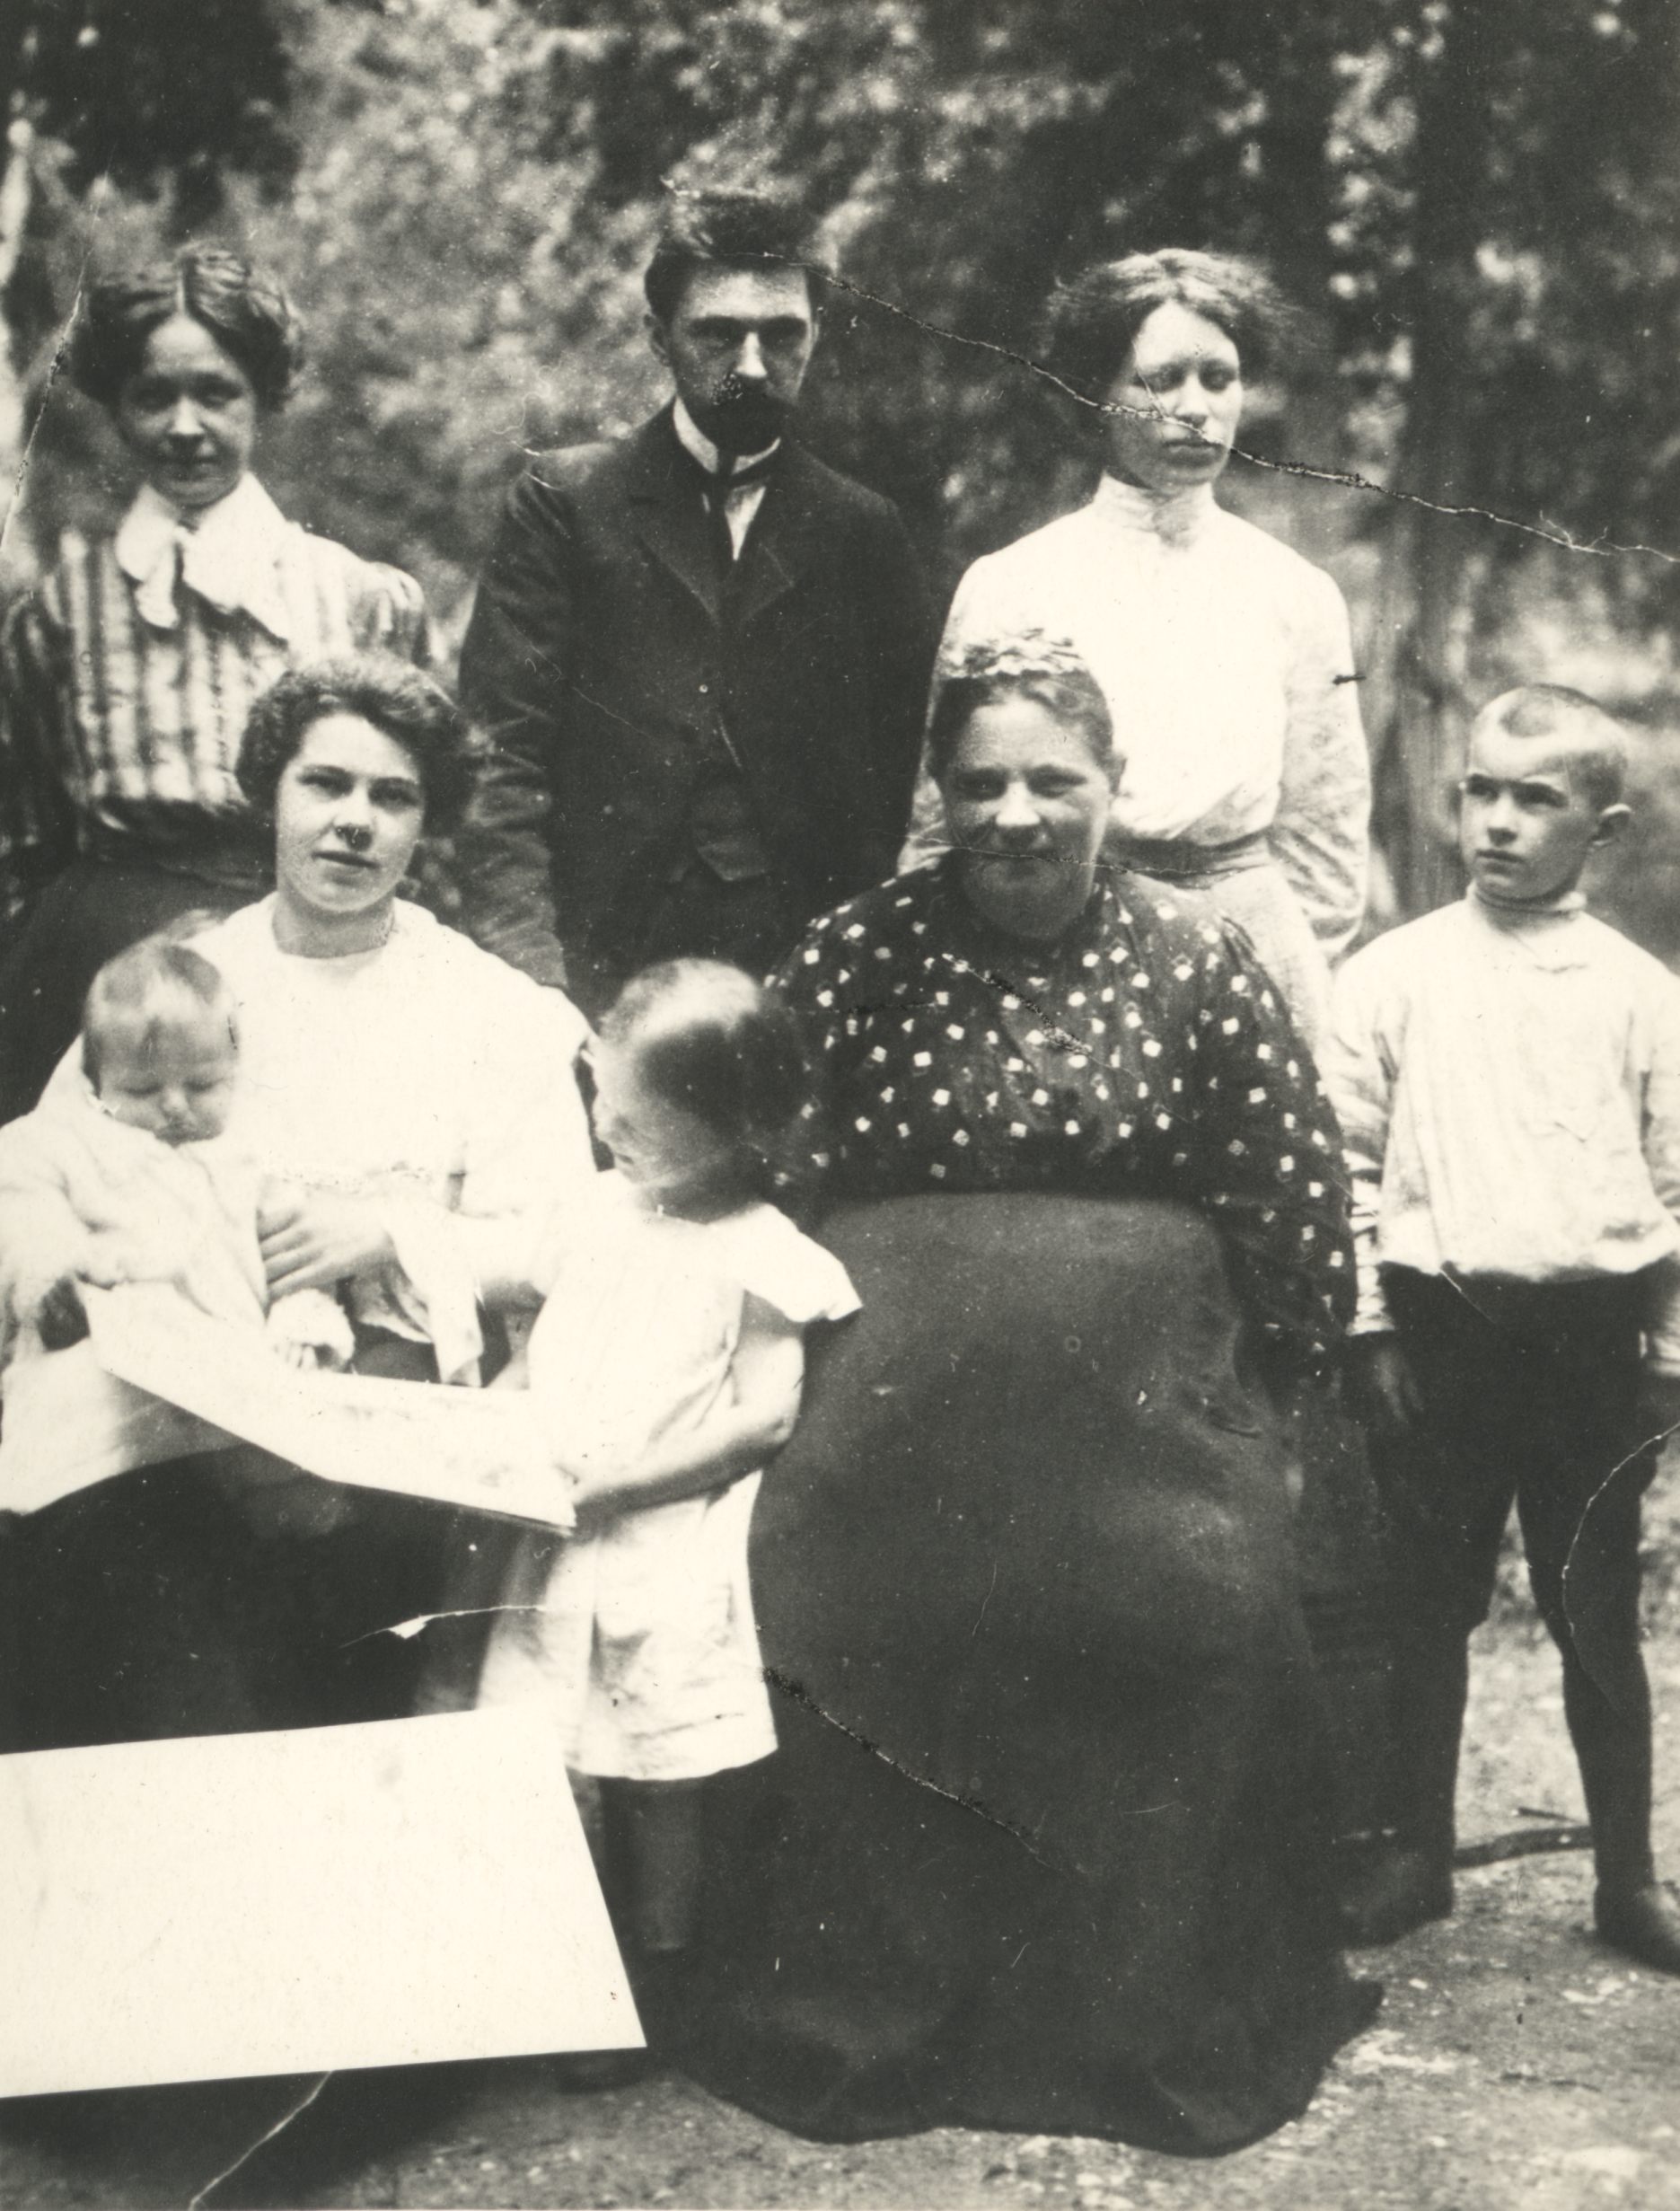 Marie Under, Karl Hacker, Berta Under, Karl Hacker's sister and mother and m. Under's children in the summer of 1906 near Moscow